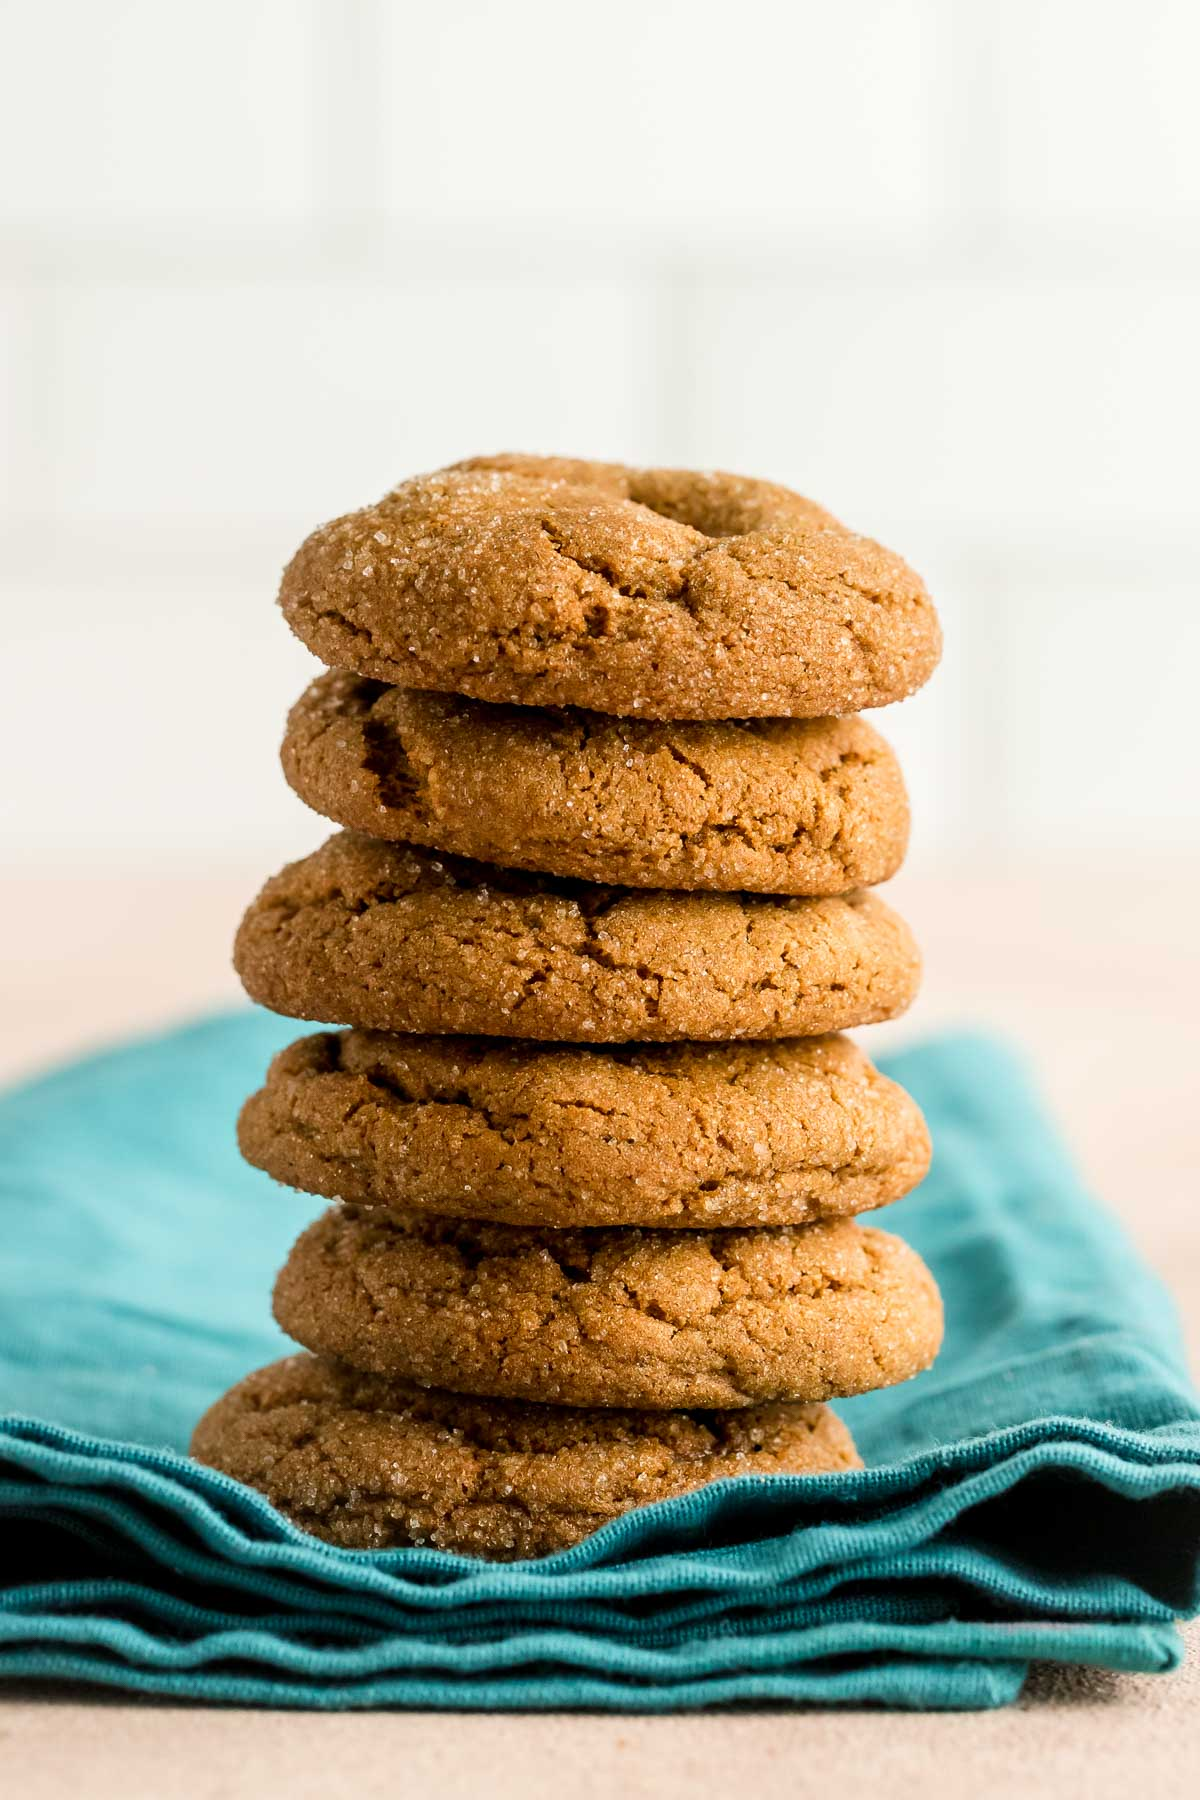 six molasses cookies stacked on a teal napkin